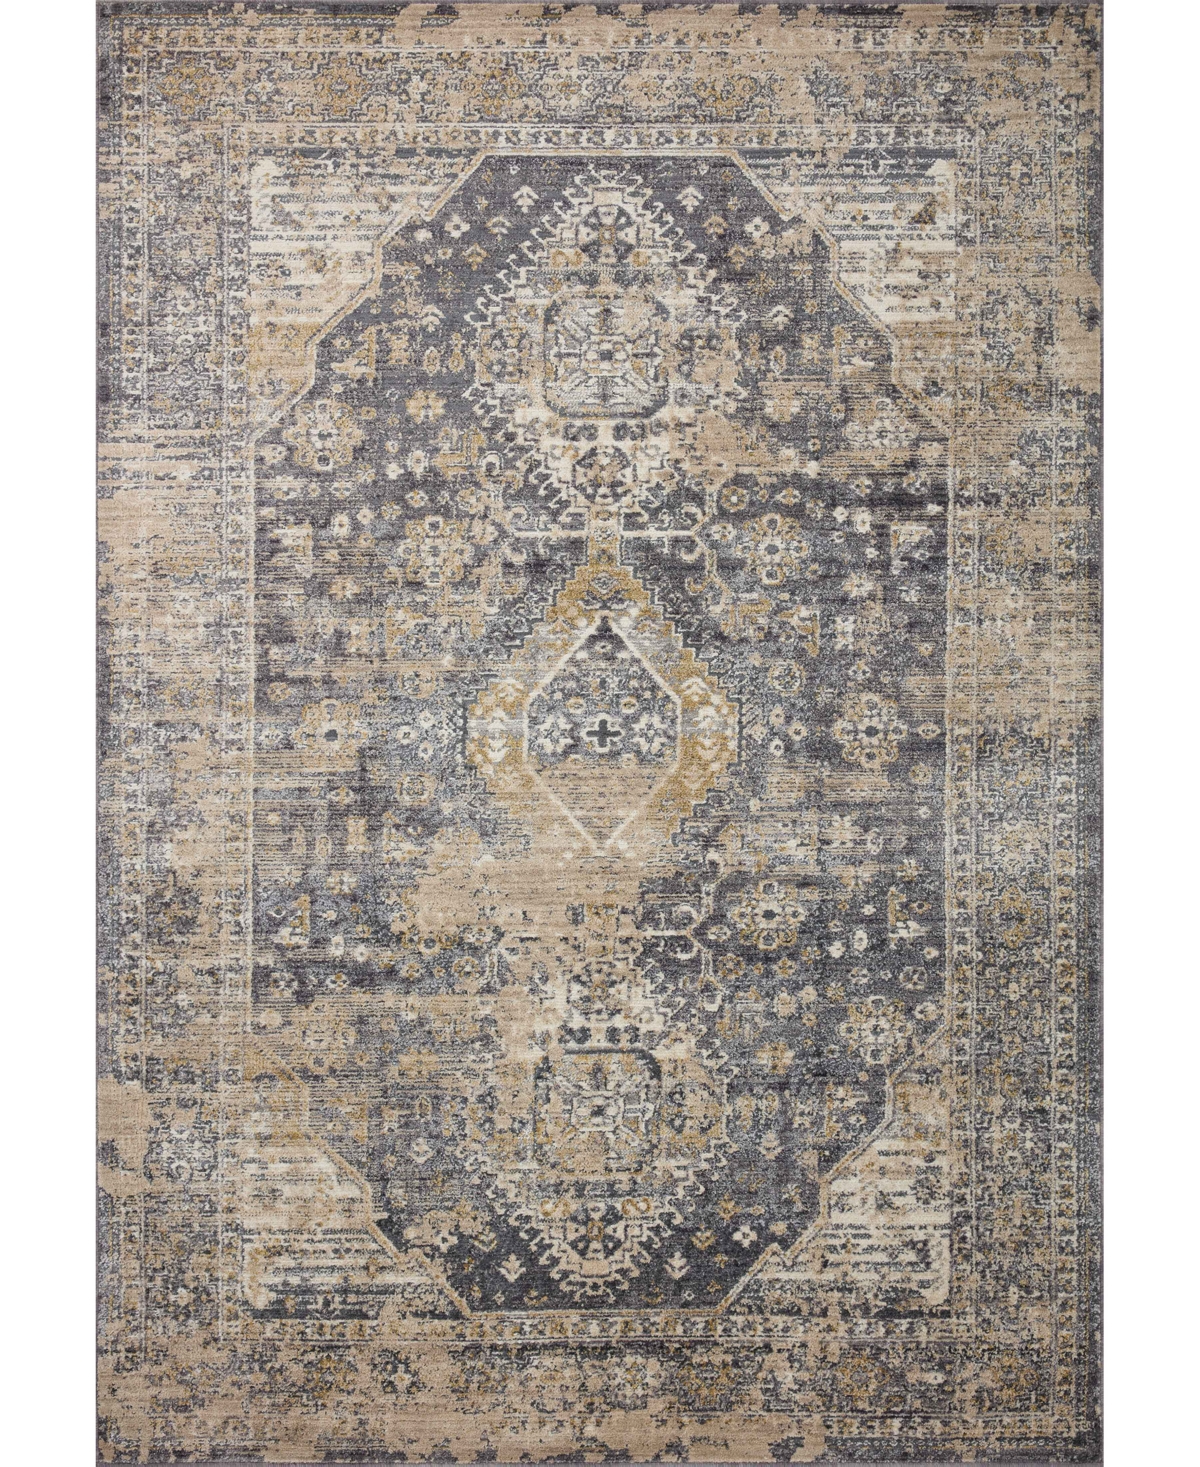 Loloi Indra Ina-03 6'3in x 9' Area Rug - Charcoal